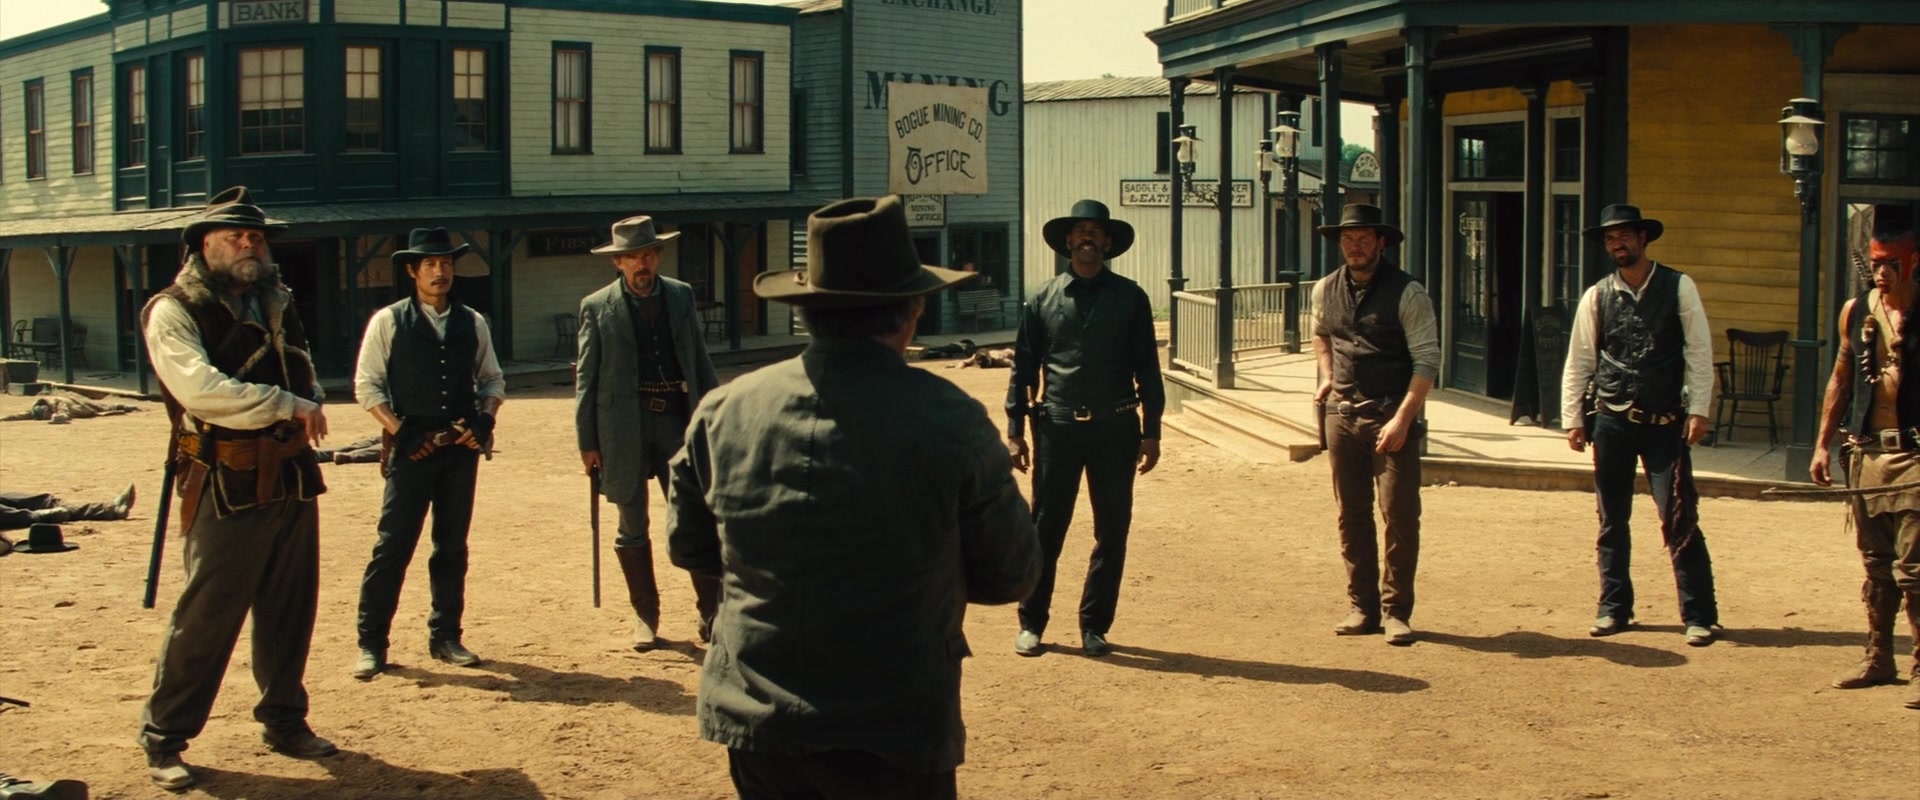 the_magnificent_seven_2016_1080p_bluray_x264-sparks_178.jpg